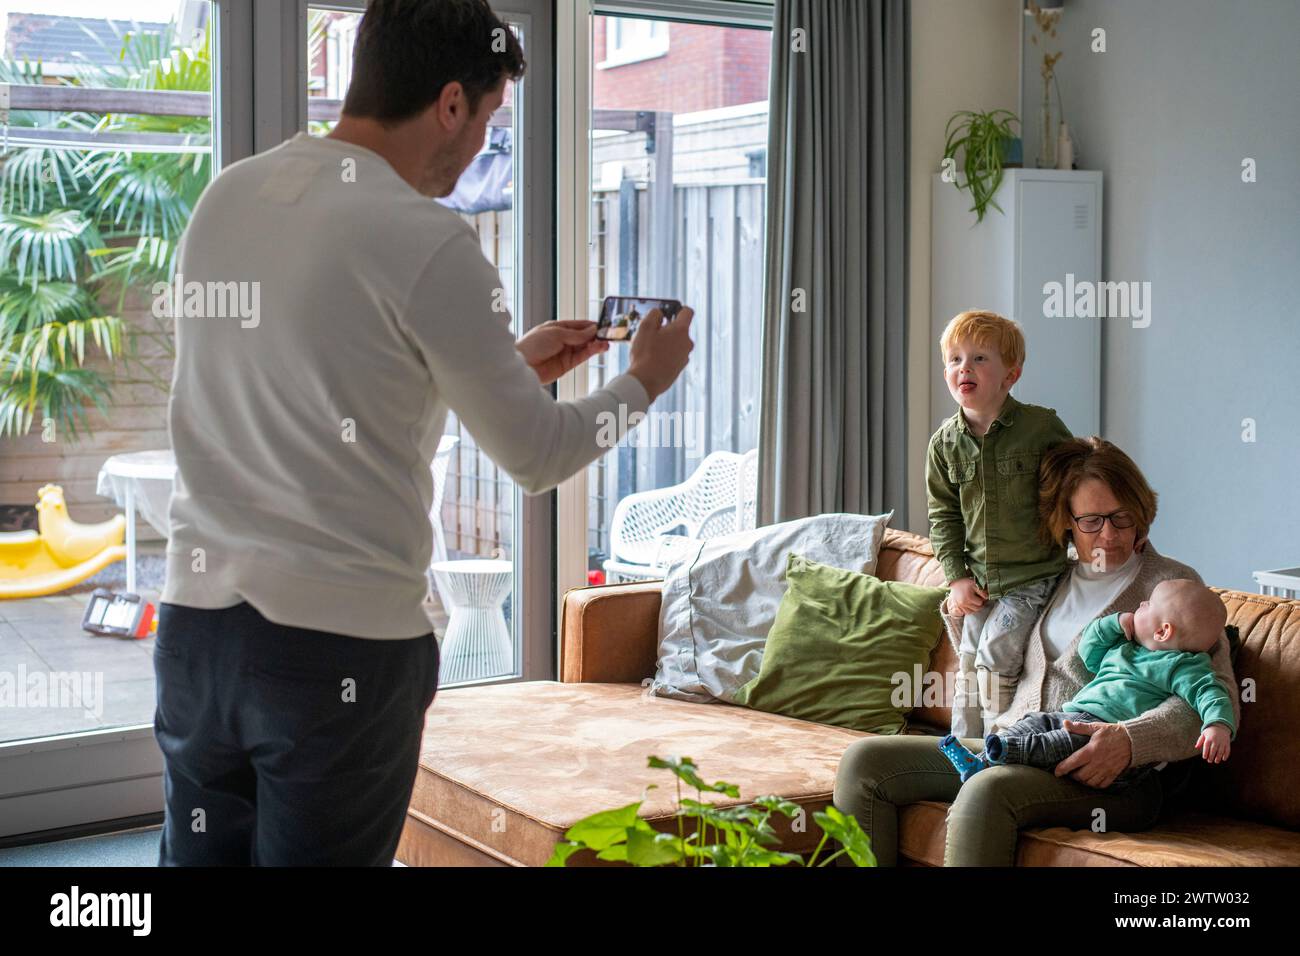 Family moment captured indoors as a man takes a photo of a woman with two young children on a cozy sofa. Stock Photo